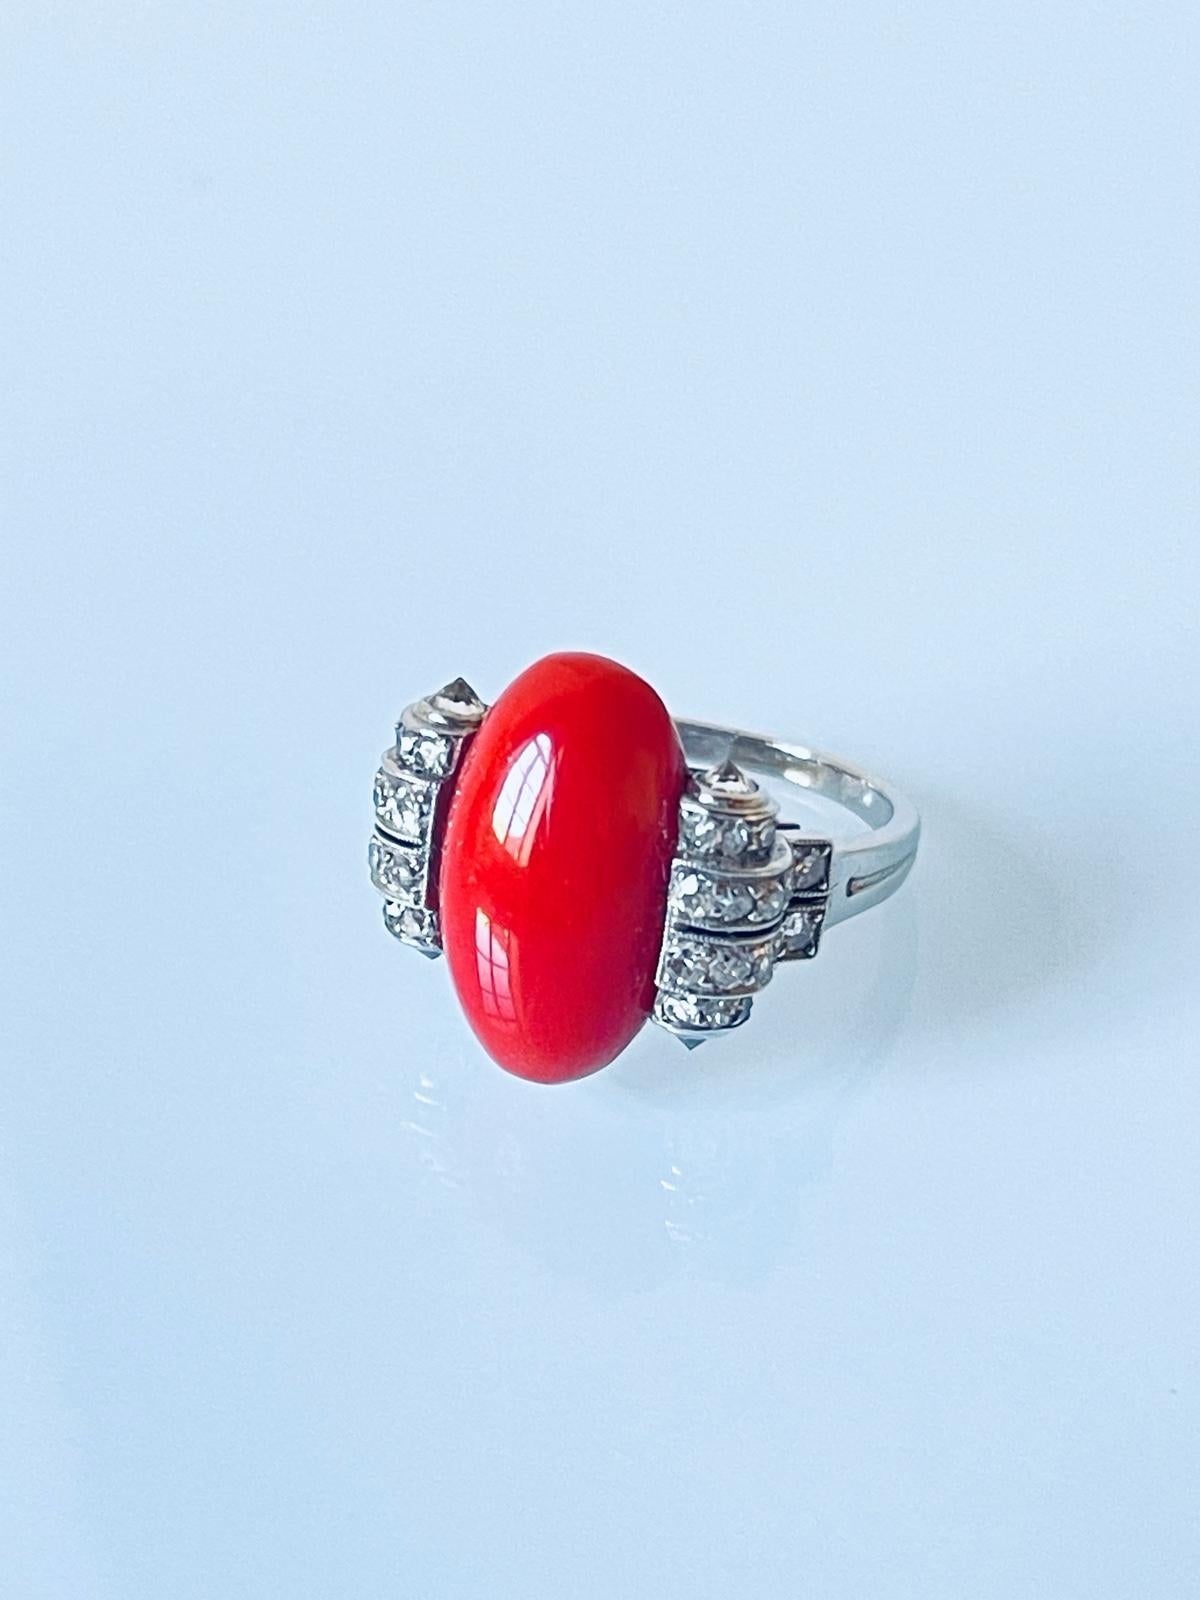 Extremely elegant and rare to find original Art Deco period ring by Boucheron. The ring is centred with a fine quality medium salmon colour natural coral cabochon embellished by 8 rows of millegrain diamonds set in a geometric design and domed by 4